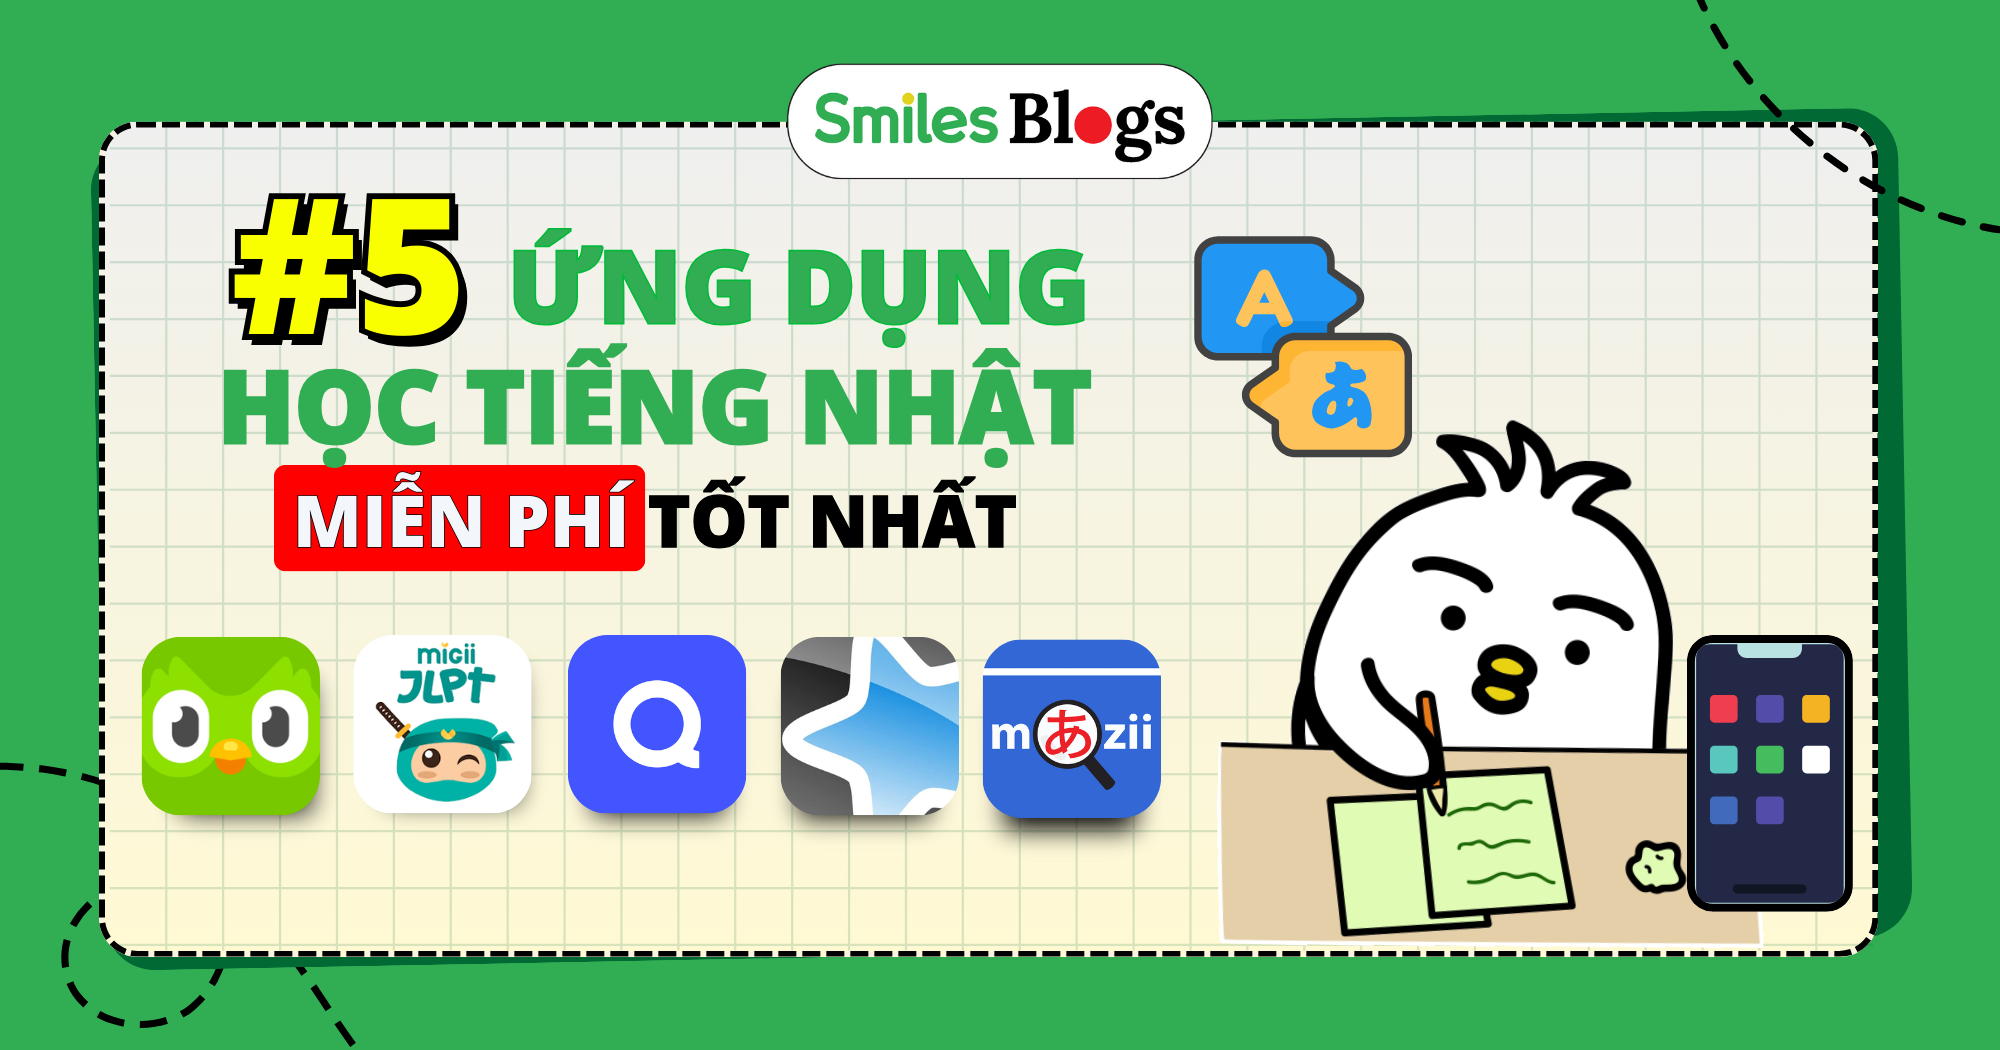 ung-dung-hoc-tieng-nhat-mien-phi